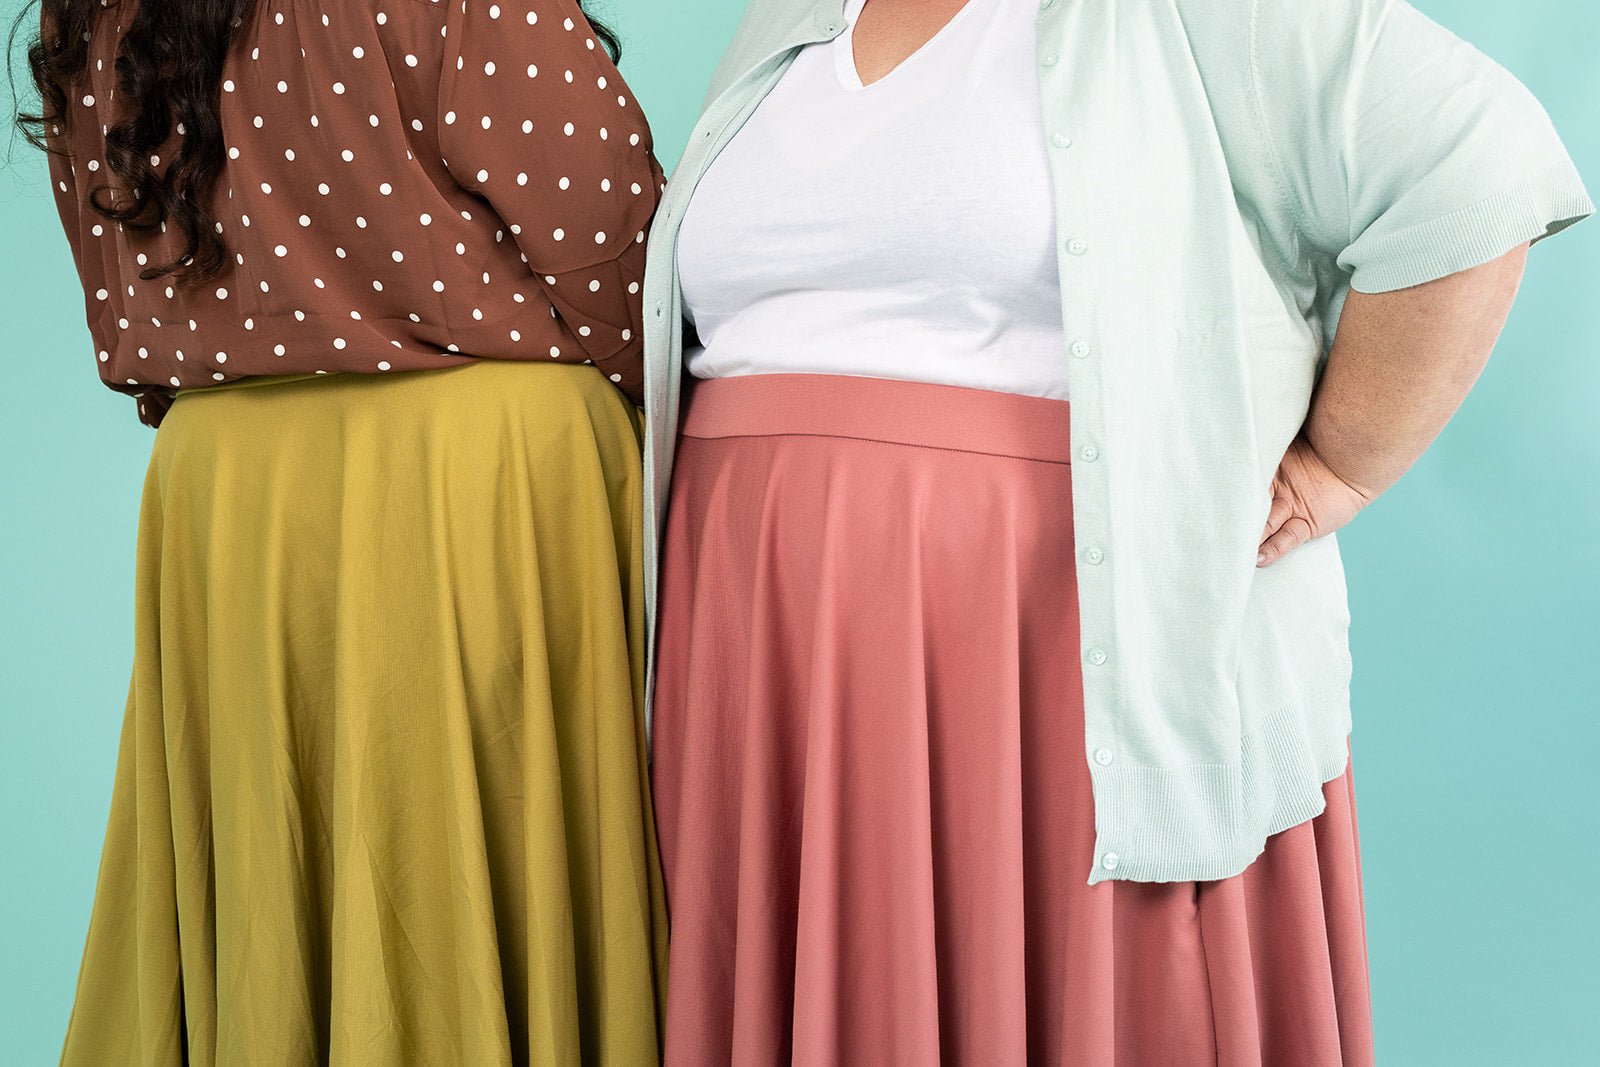 Two people are shown modelling skirts. One is wearing a brown shirt with polka dots and a mustard coloured skirt. The second woman is wearing a white tshirt, light blue cardigan and a pink skirt